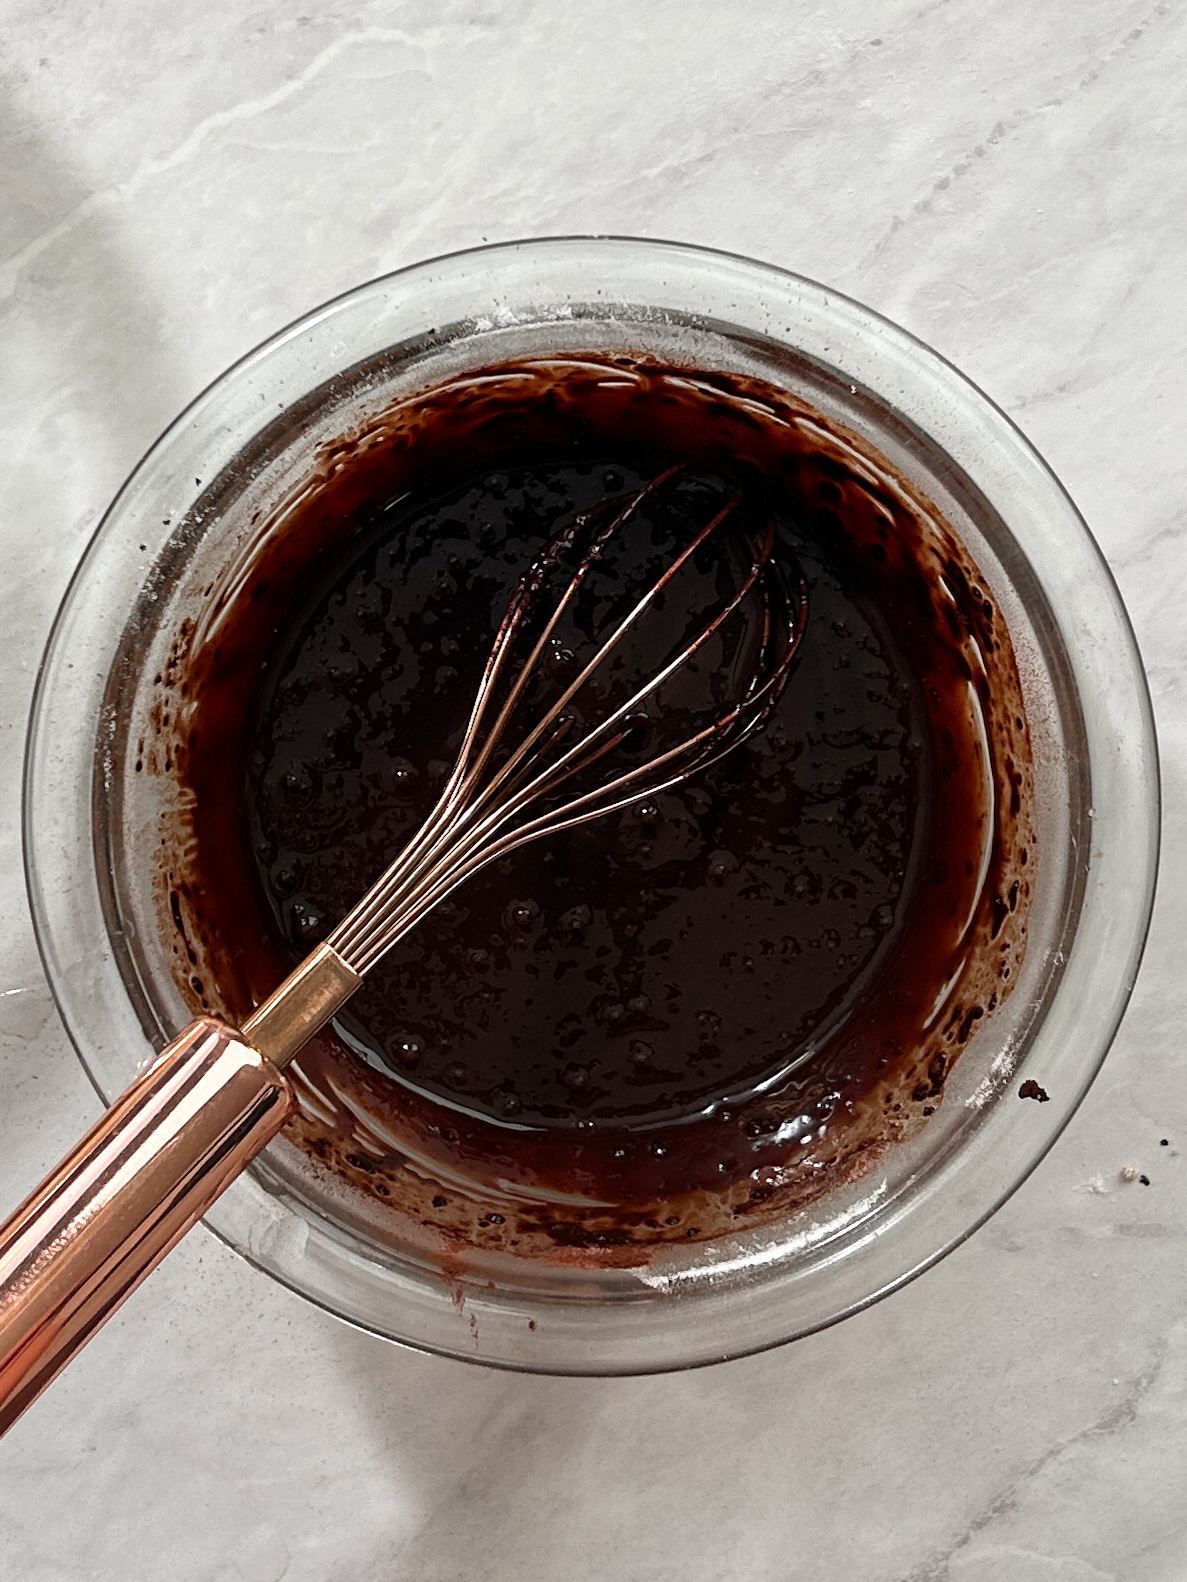 bloomed cocoa powder mixture in a small glass bowl